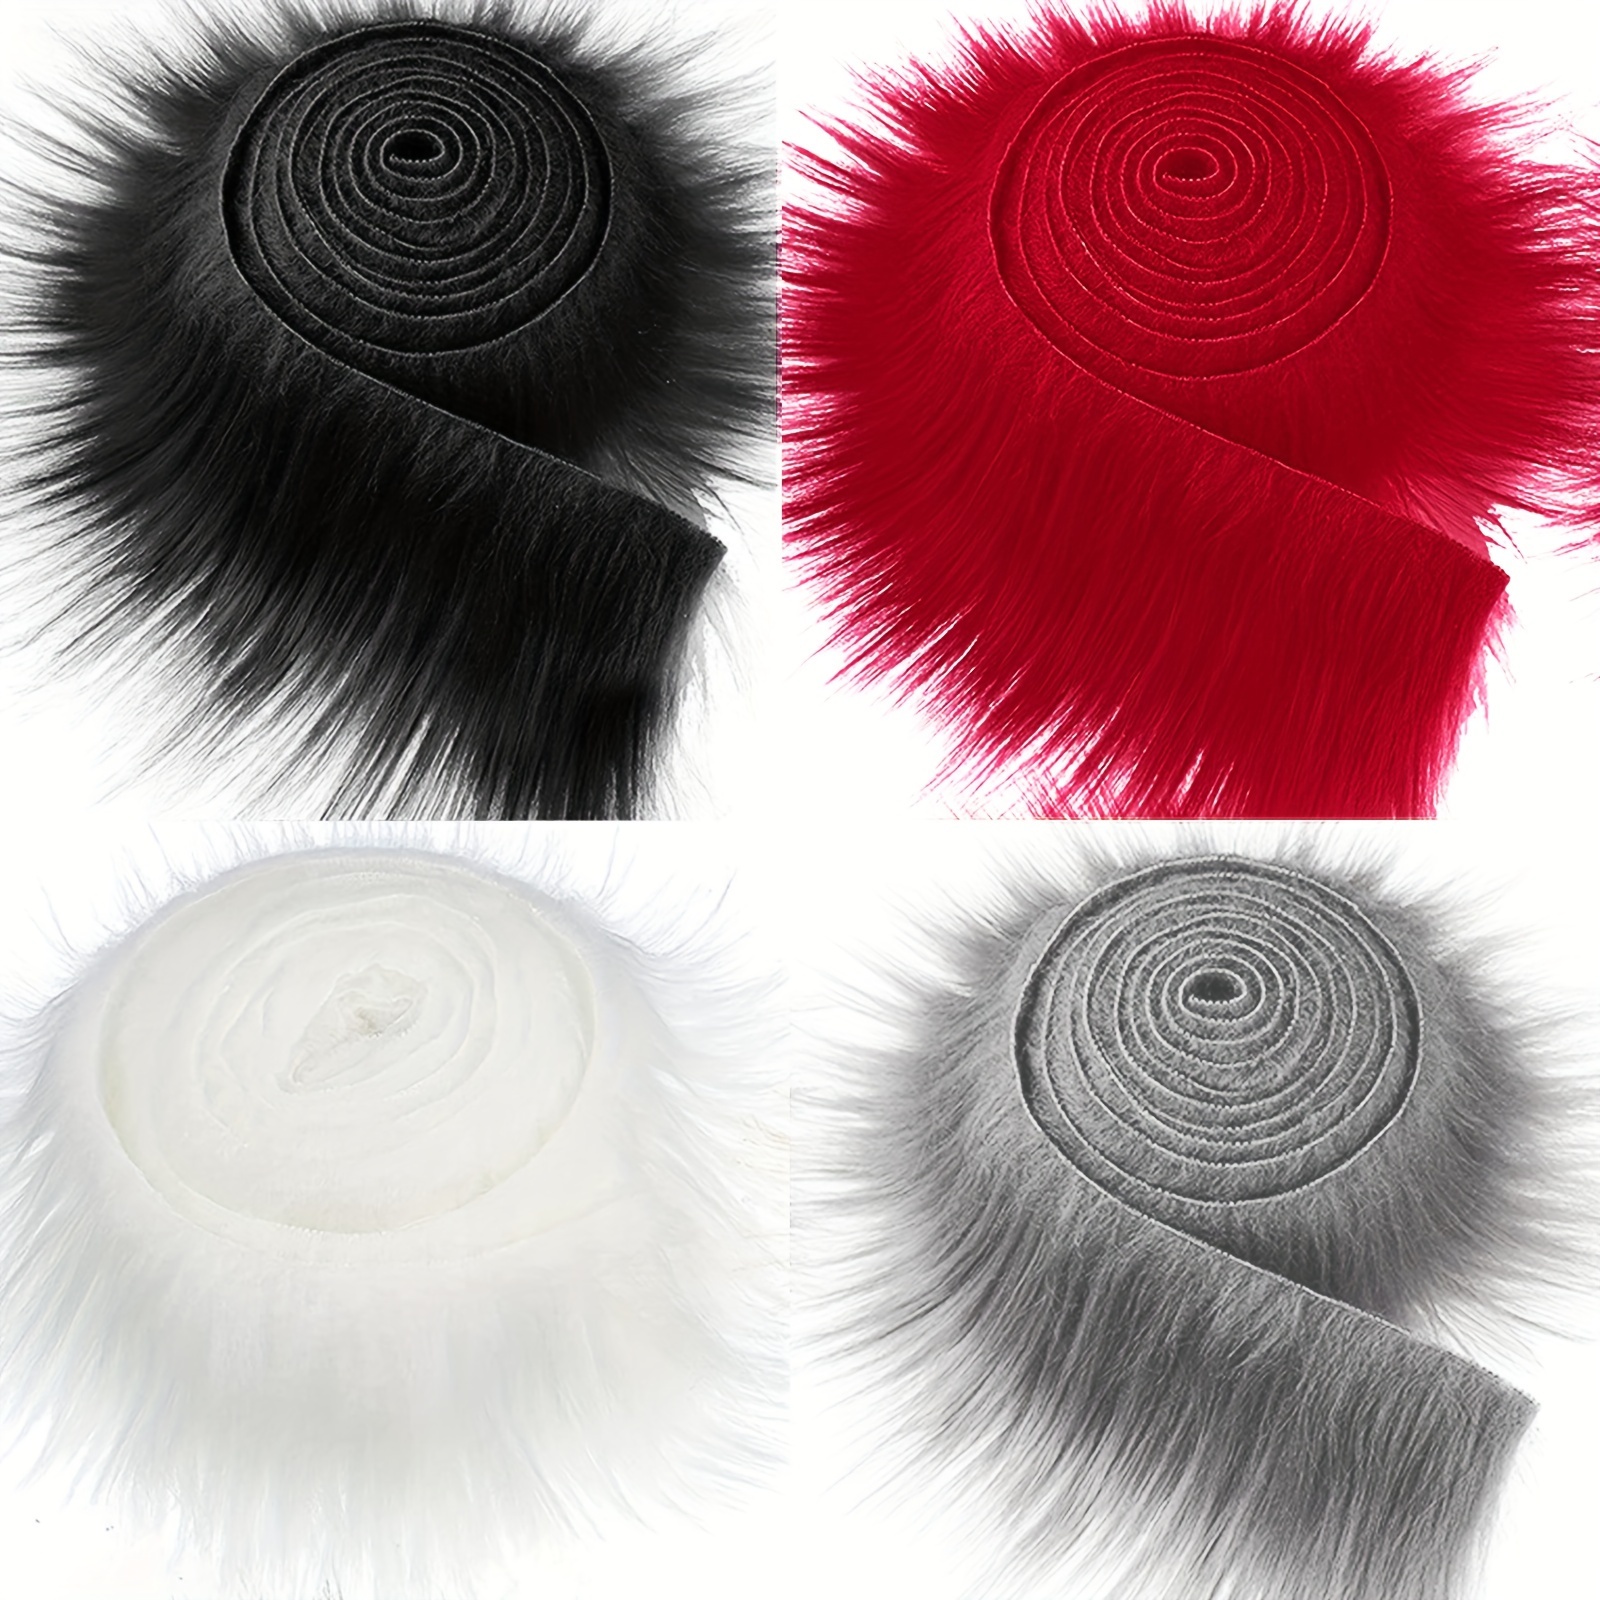 

1 Pc Handmade Long Faux Fabric Shaggy Fur Patches Fabric Trim Ribbon Chair Cover Seat Cushion Pad Supplies For Diy Craft Costume Decoration, Make For Shoes Hats